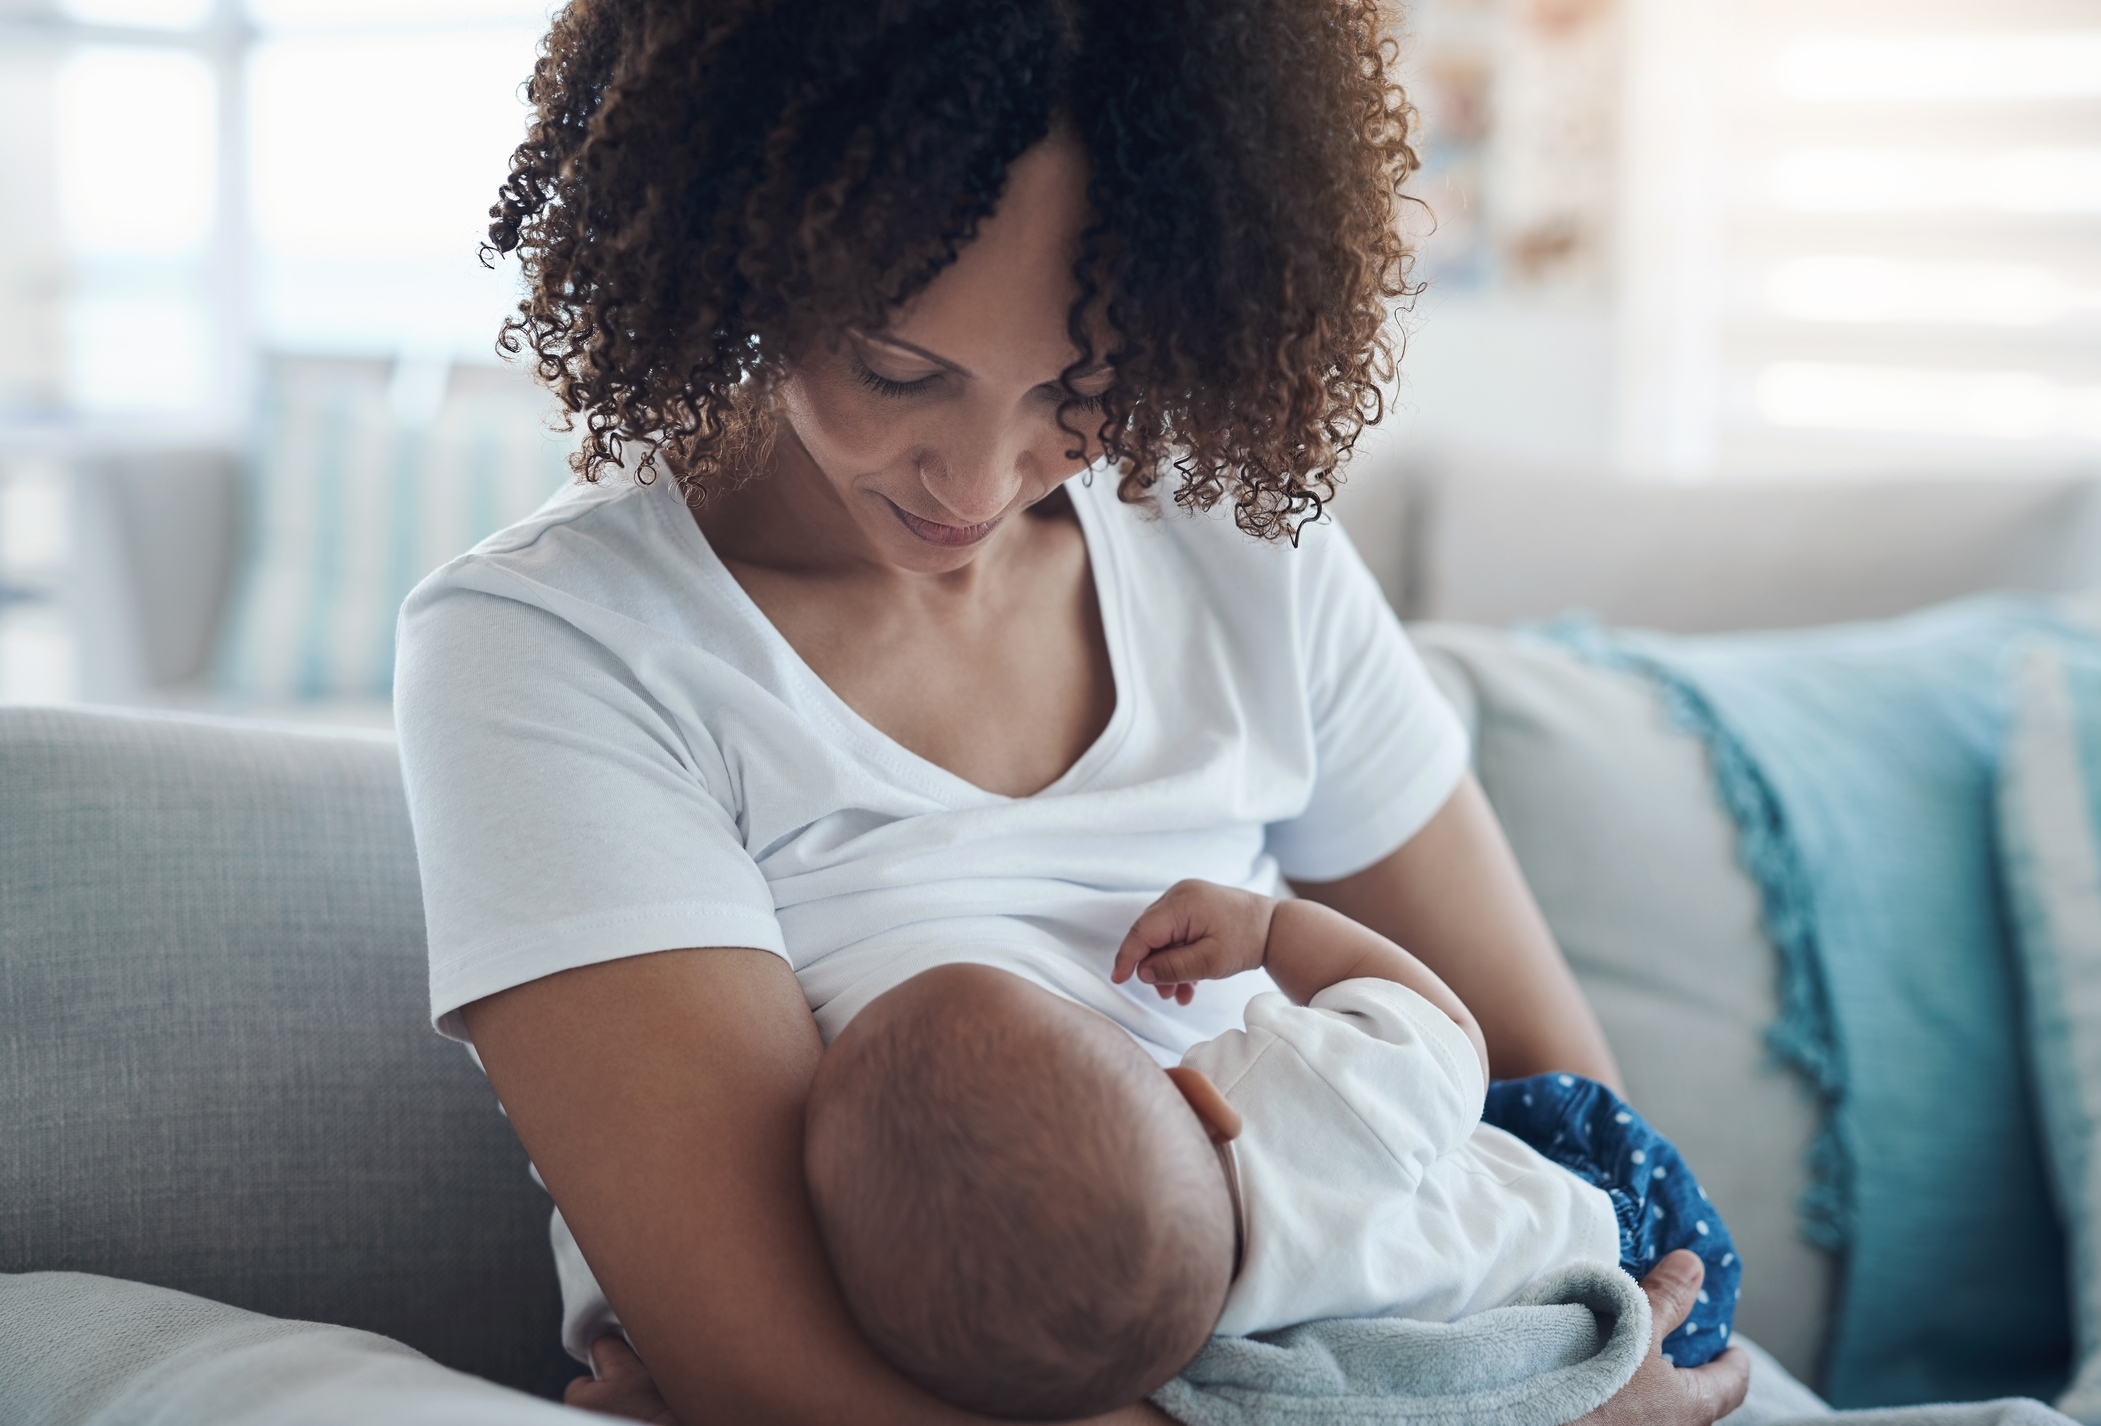 Black woman breastfeeds her infant